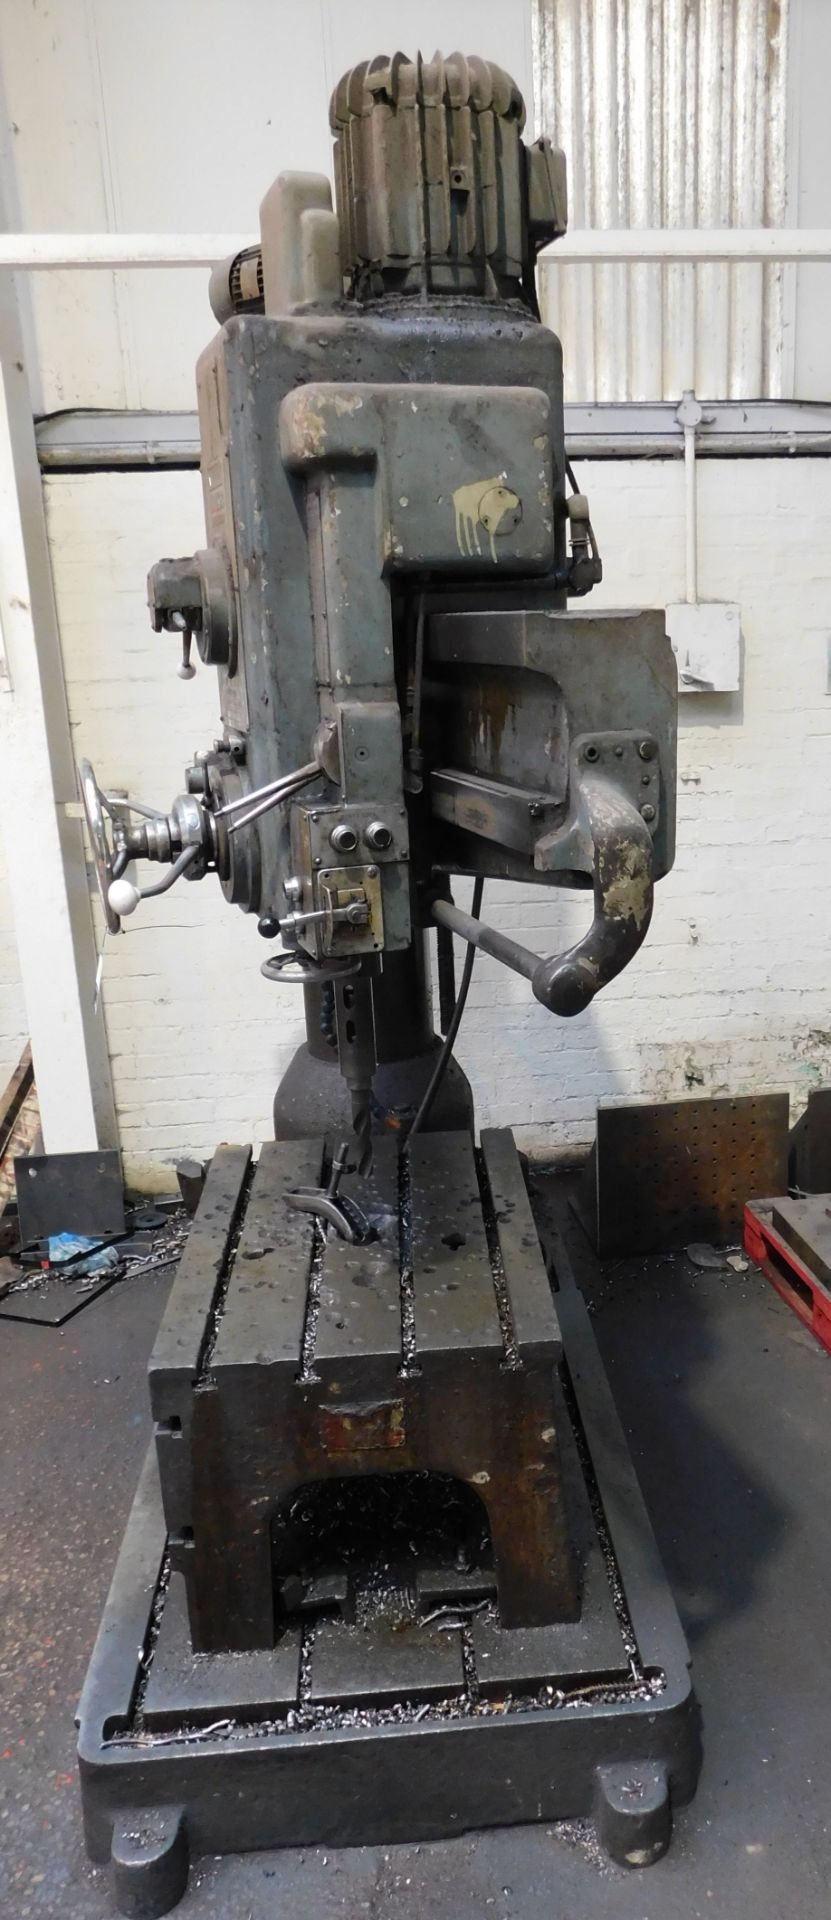 Kitchen & Walker Radial Arm Drill, with Assorted Drill Bits – Risk Assessment & Method Statement - Image 3 of 6